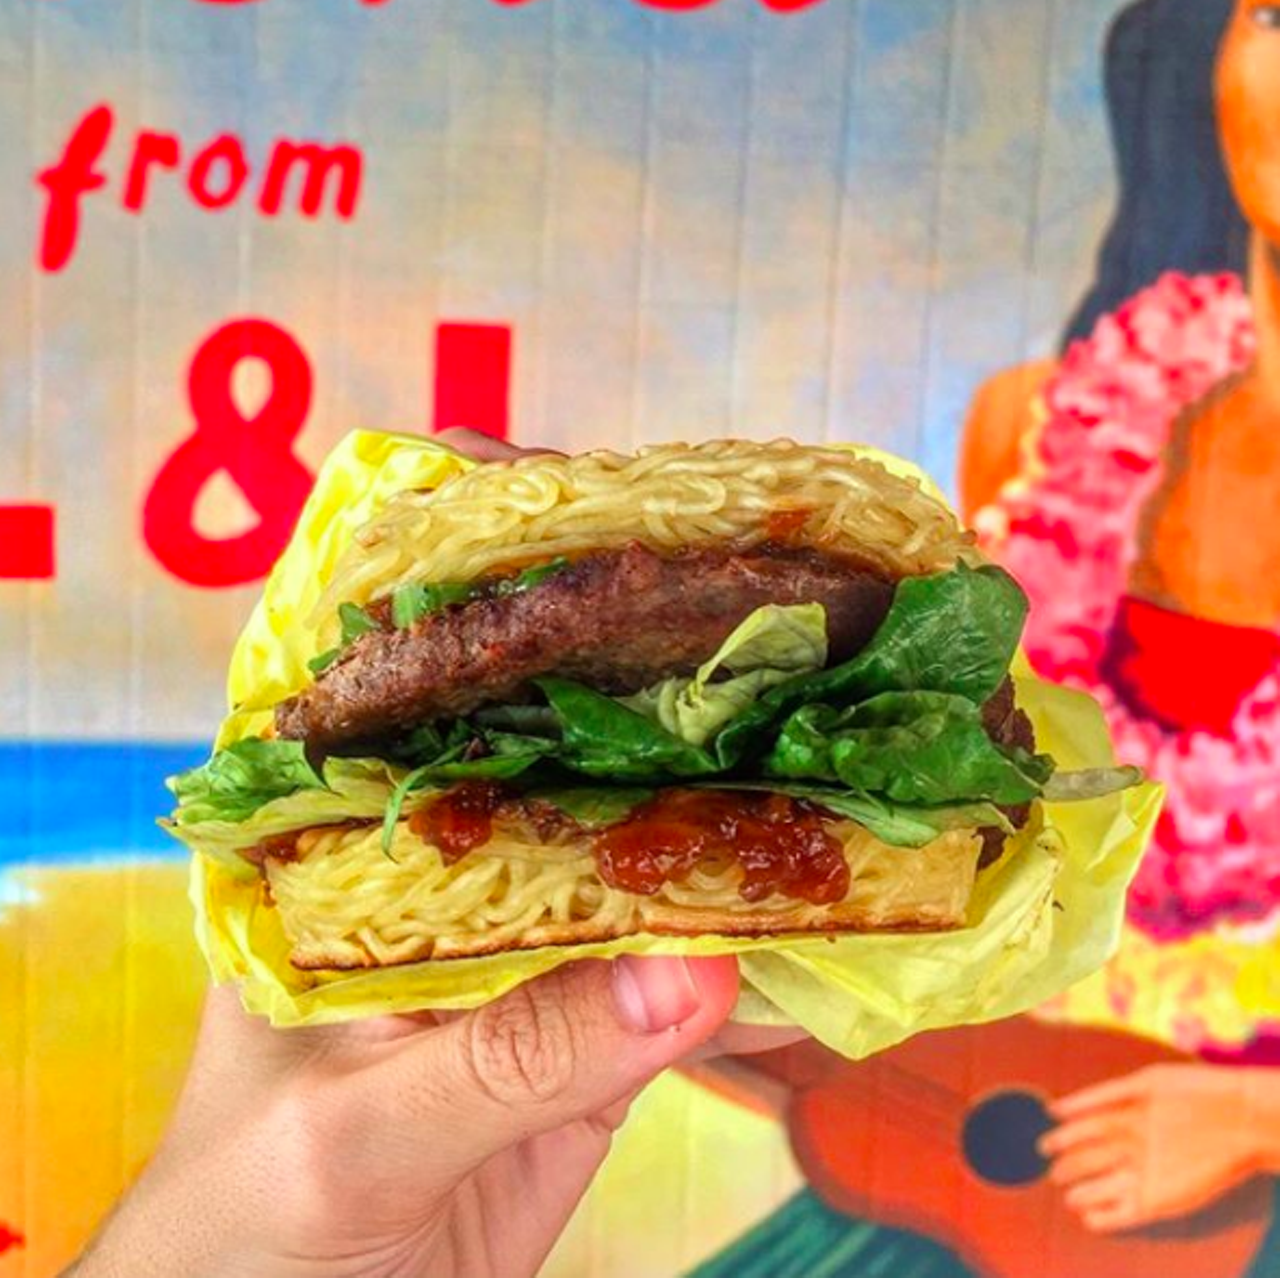 L & L Hawaiian Grill
1302 Austin Hwy #1, (210) 474-6699, llhawaiiangrill.com
Transport yourself to the island and order up treats like a local. Opt for the ramen burger or go for something more traditional like the moco loco (don’t let the name fool you).
Photo via Instagram / safood.e